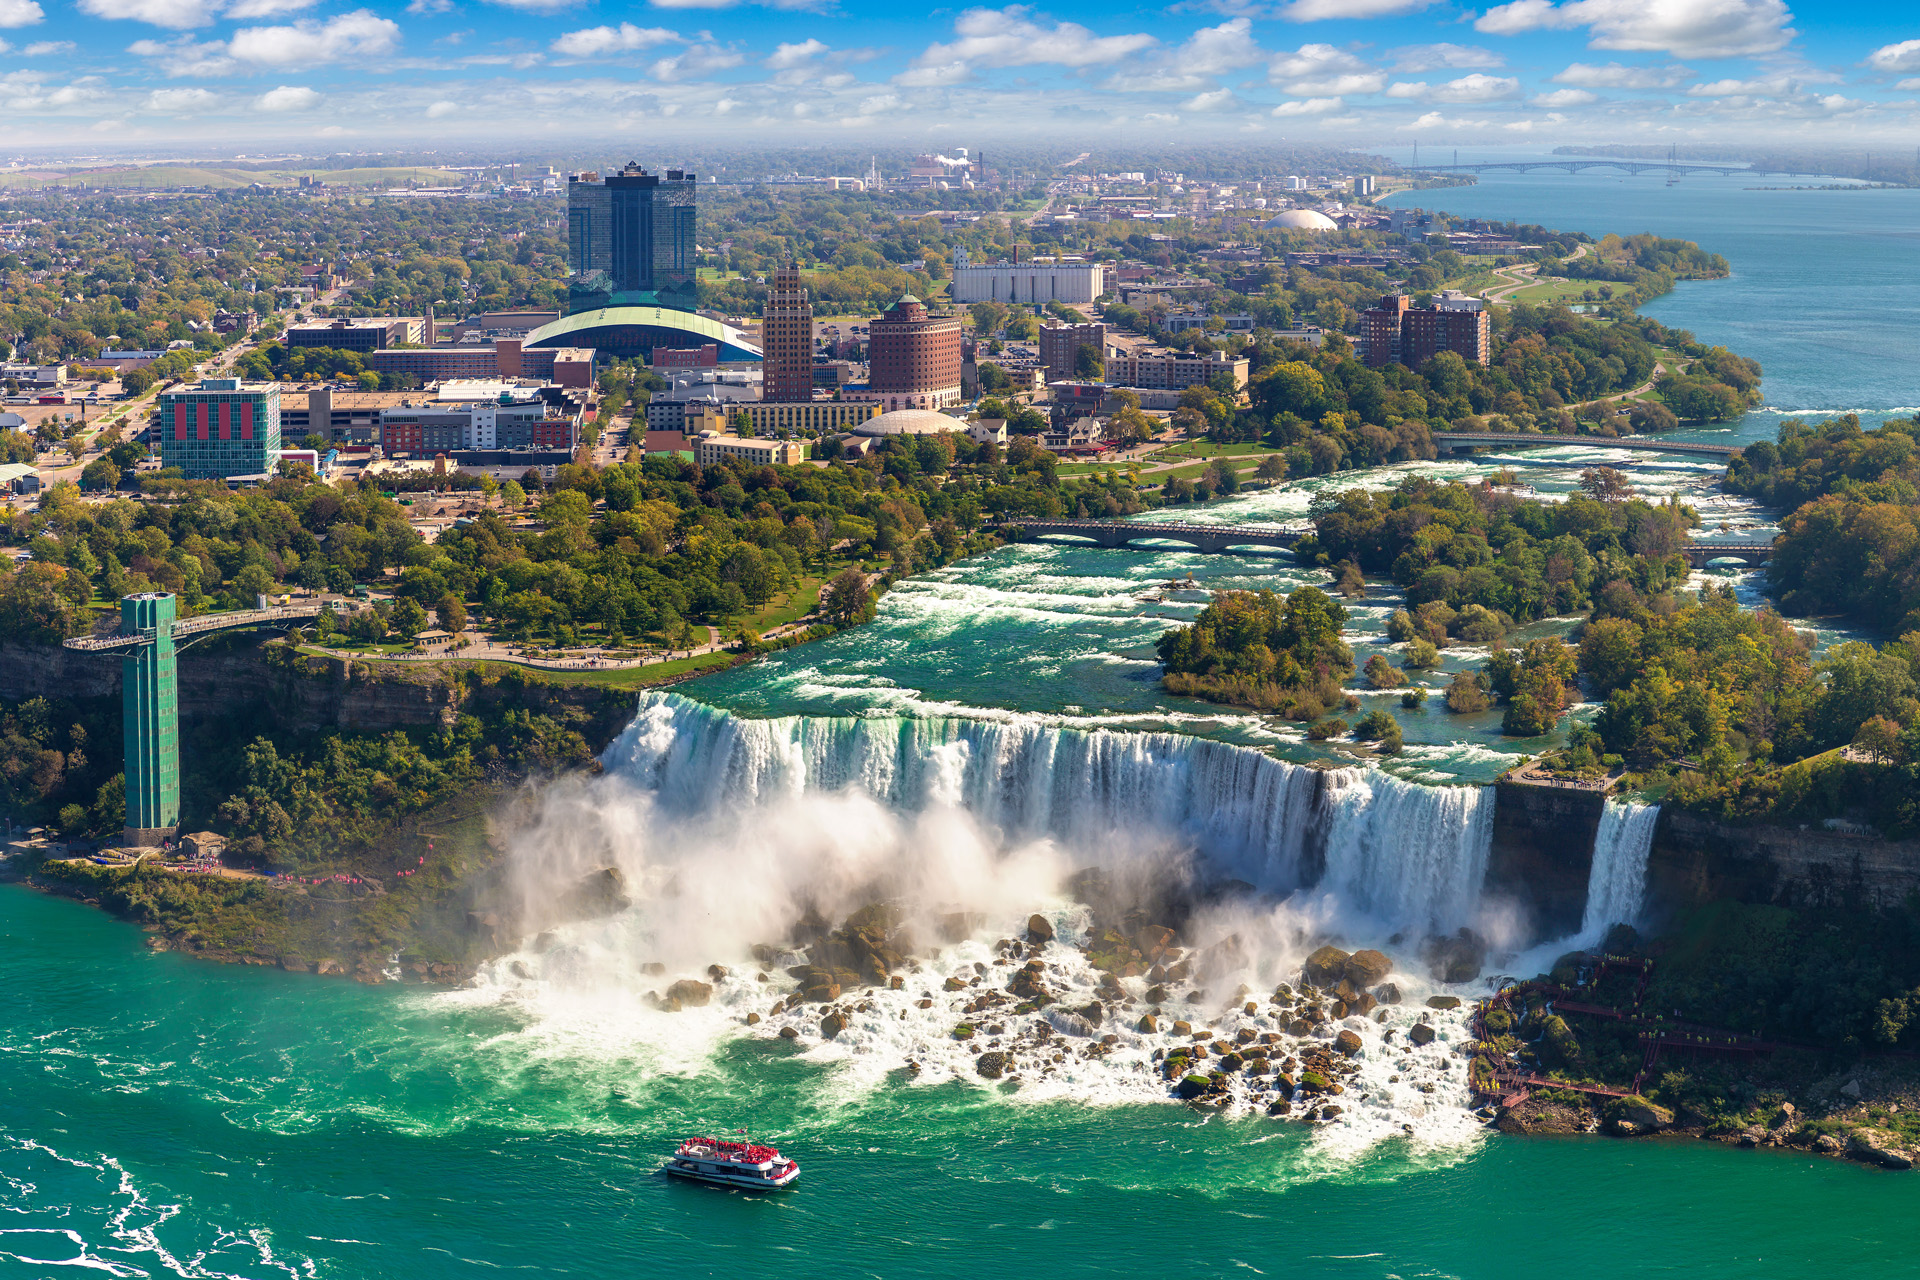 Panorama of aerial view of Canadian side view of Niagara Falls, American Falls and Observation Tower in Niagara Falls, Ontario, Canada